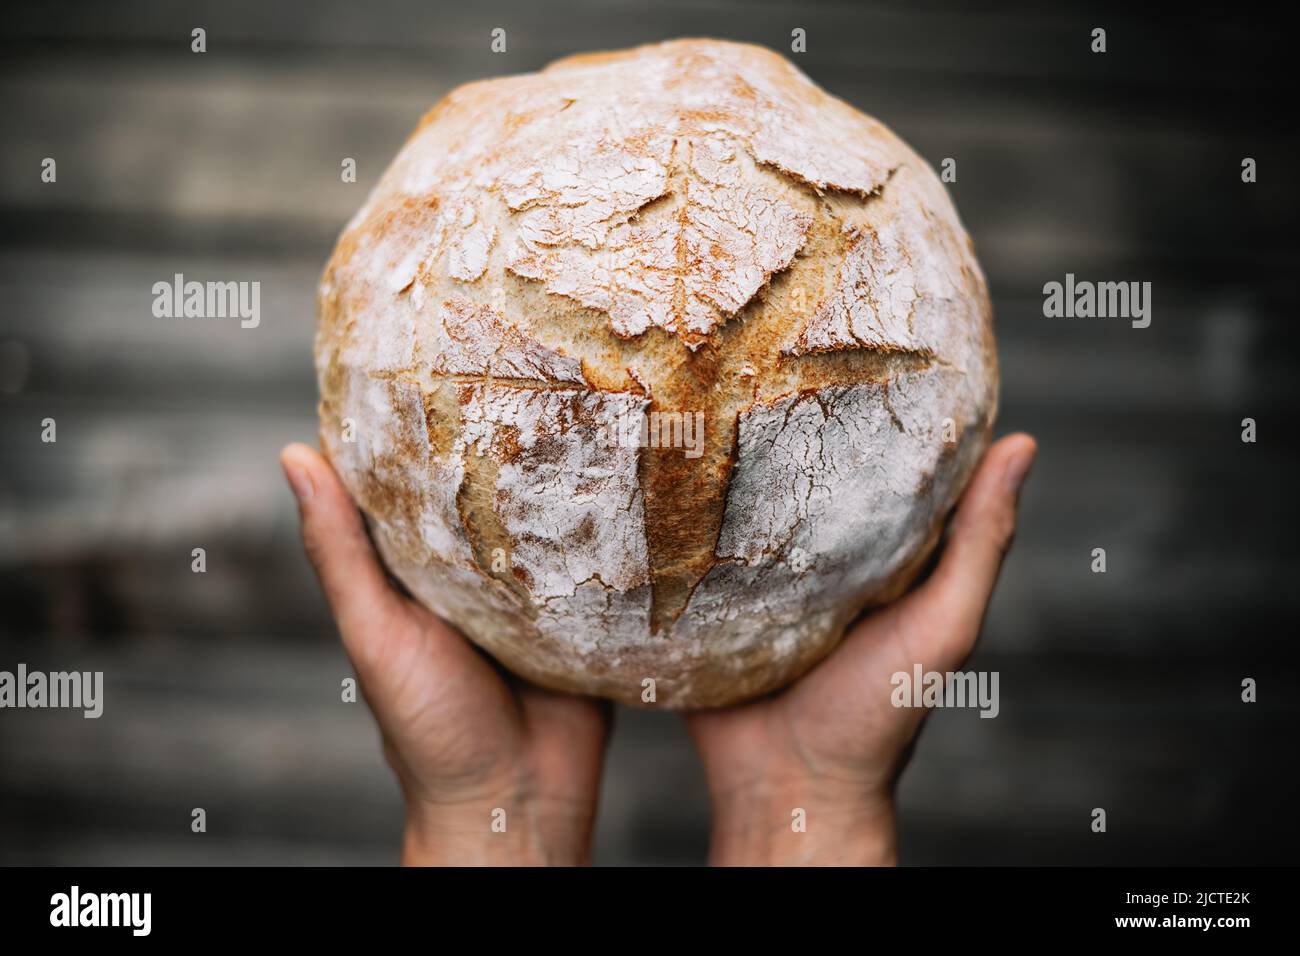 Traditional leavened sourdough bread in baker hands on a rustic wooden table. Healthy food photography Stock Photo